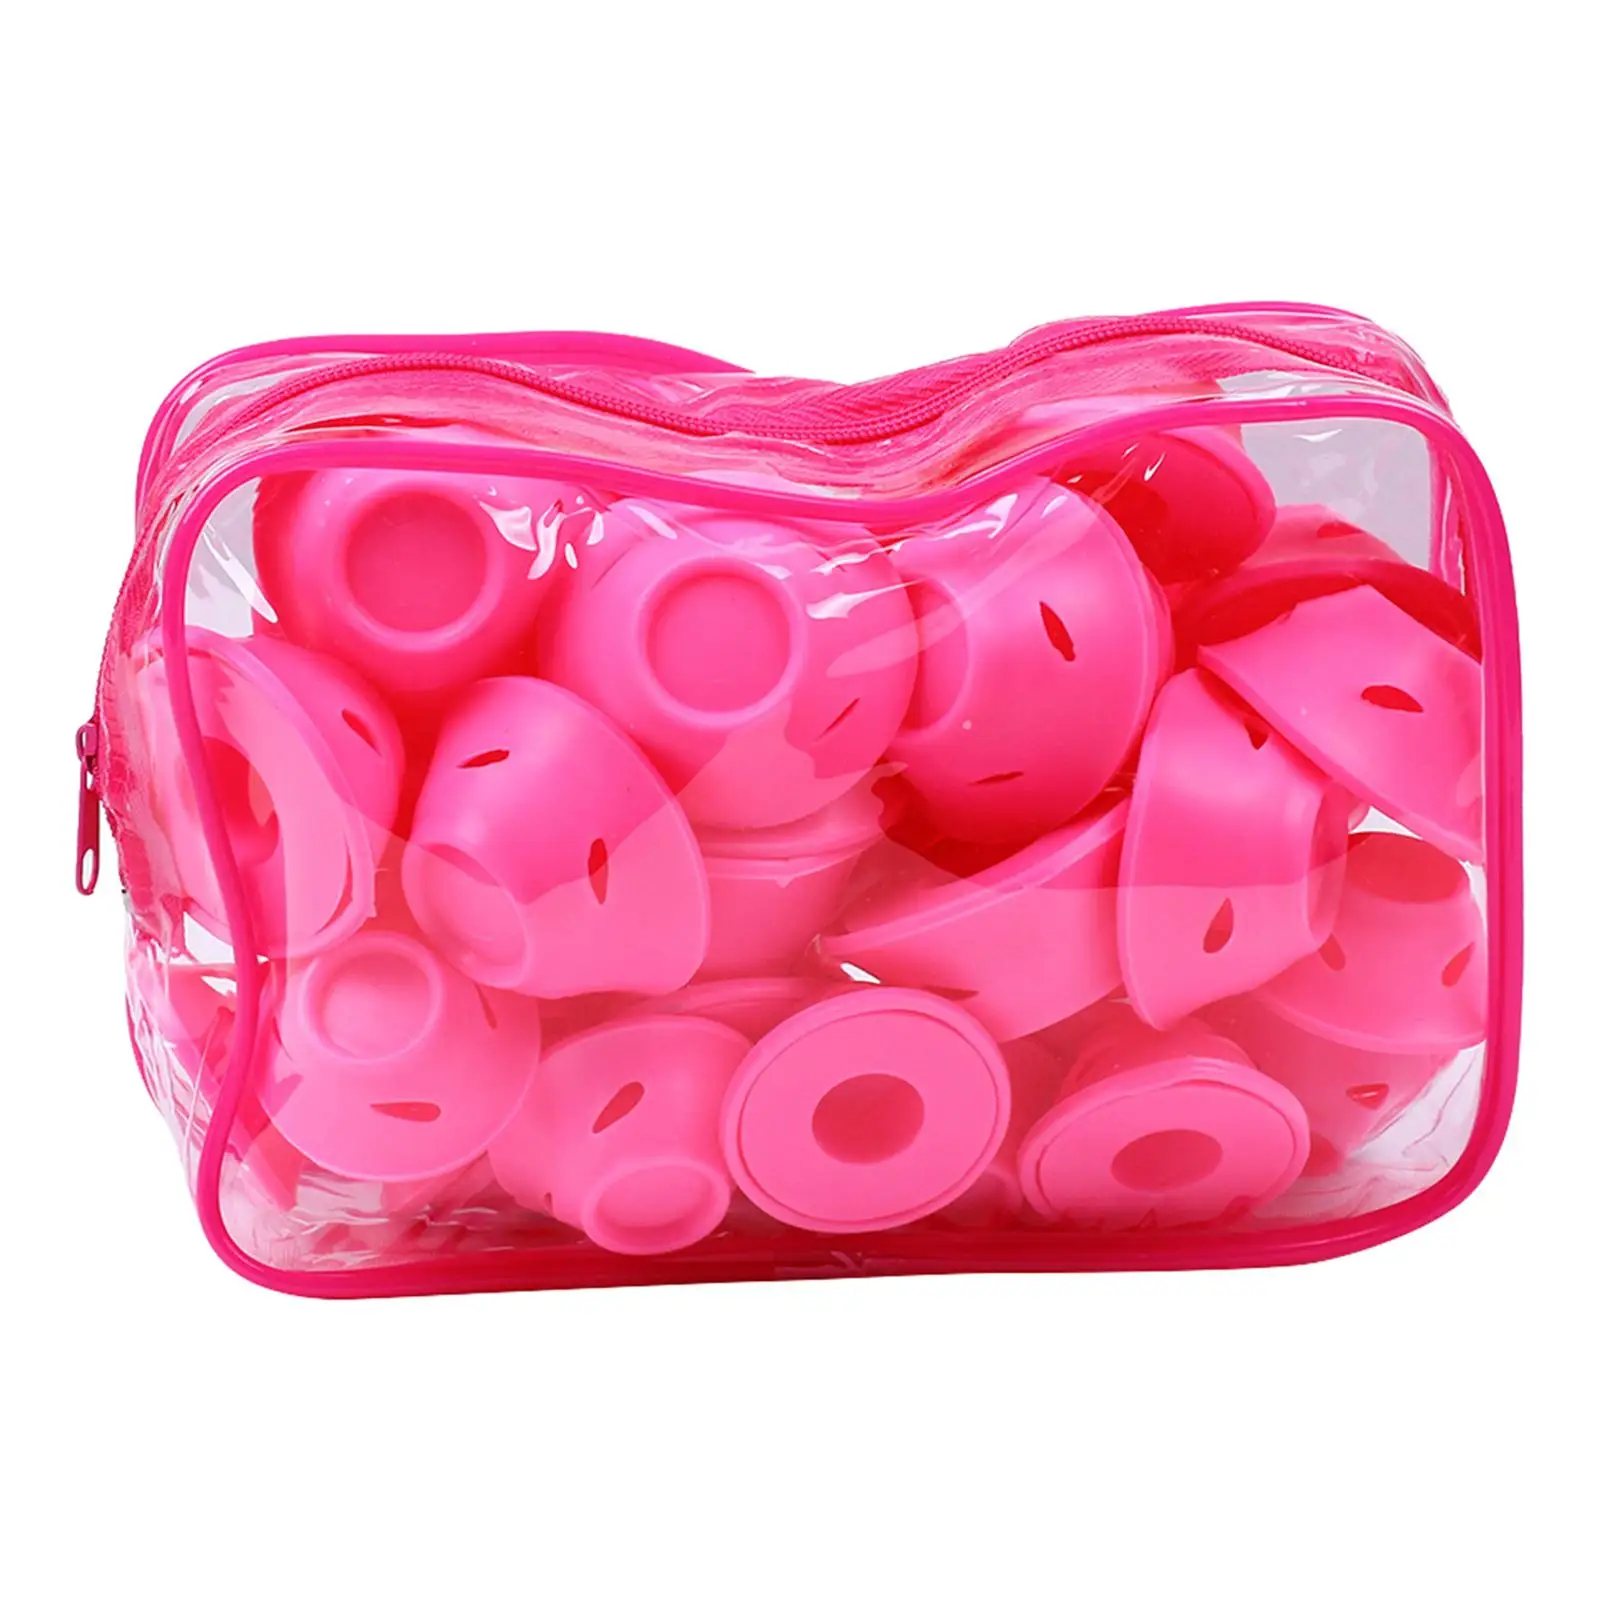 30x Hair Rollers Non Heating Silicone Hair Accessories Curling for Natural Curls